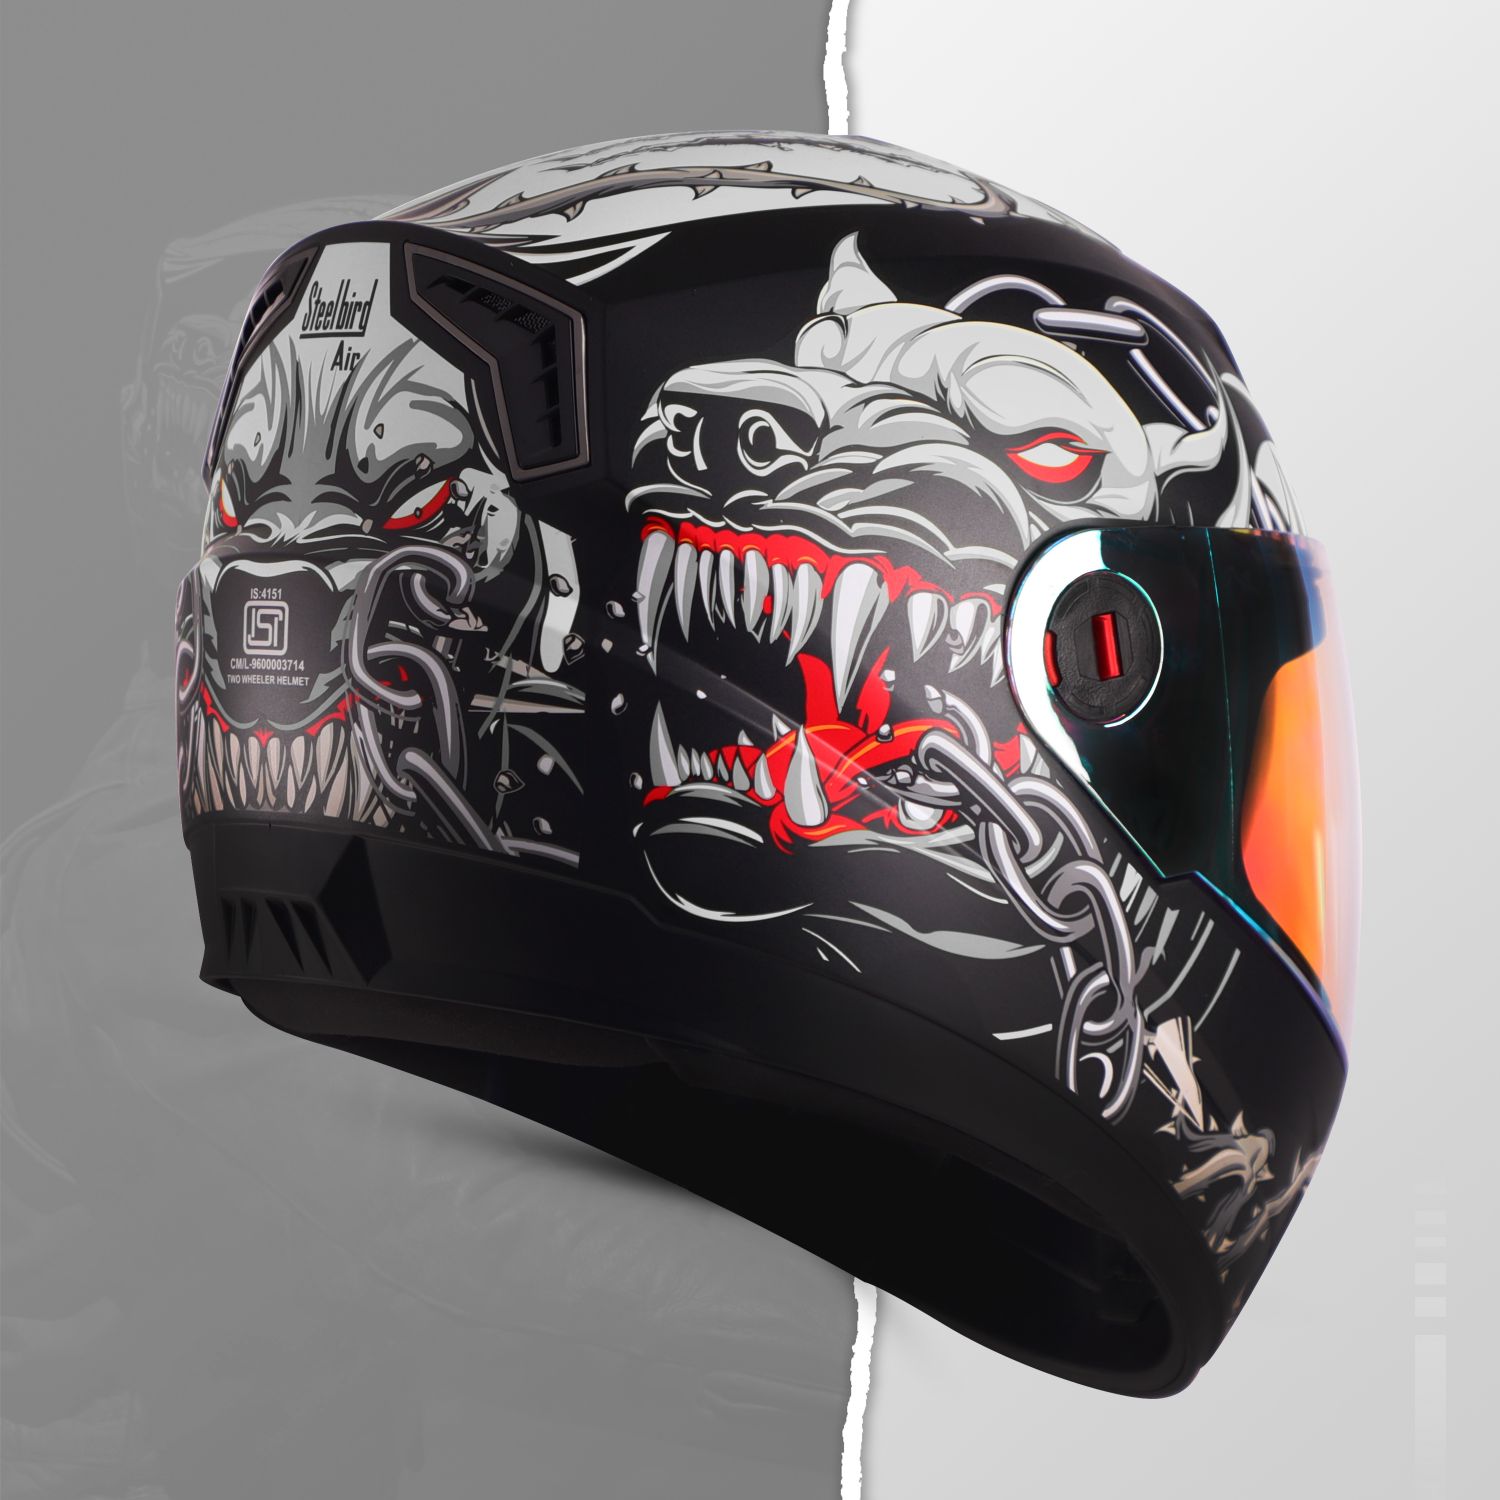 Steelbird SBA-1 Angry Dog ISI Certified Full Face Graphic Helmet For Men And Women (Matt Black Grey With Night Vision Gold Visor)